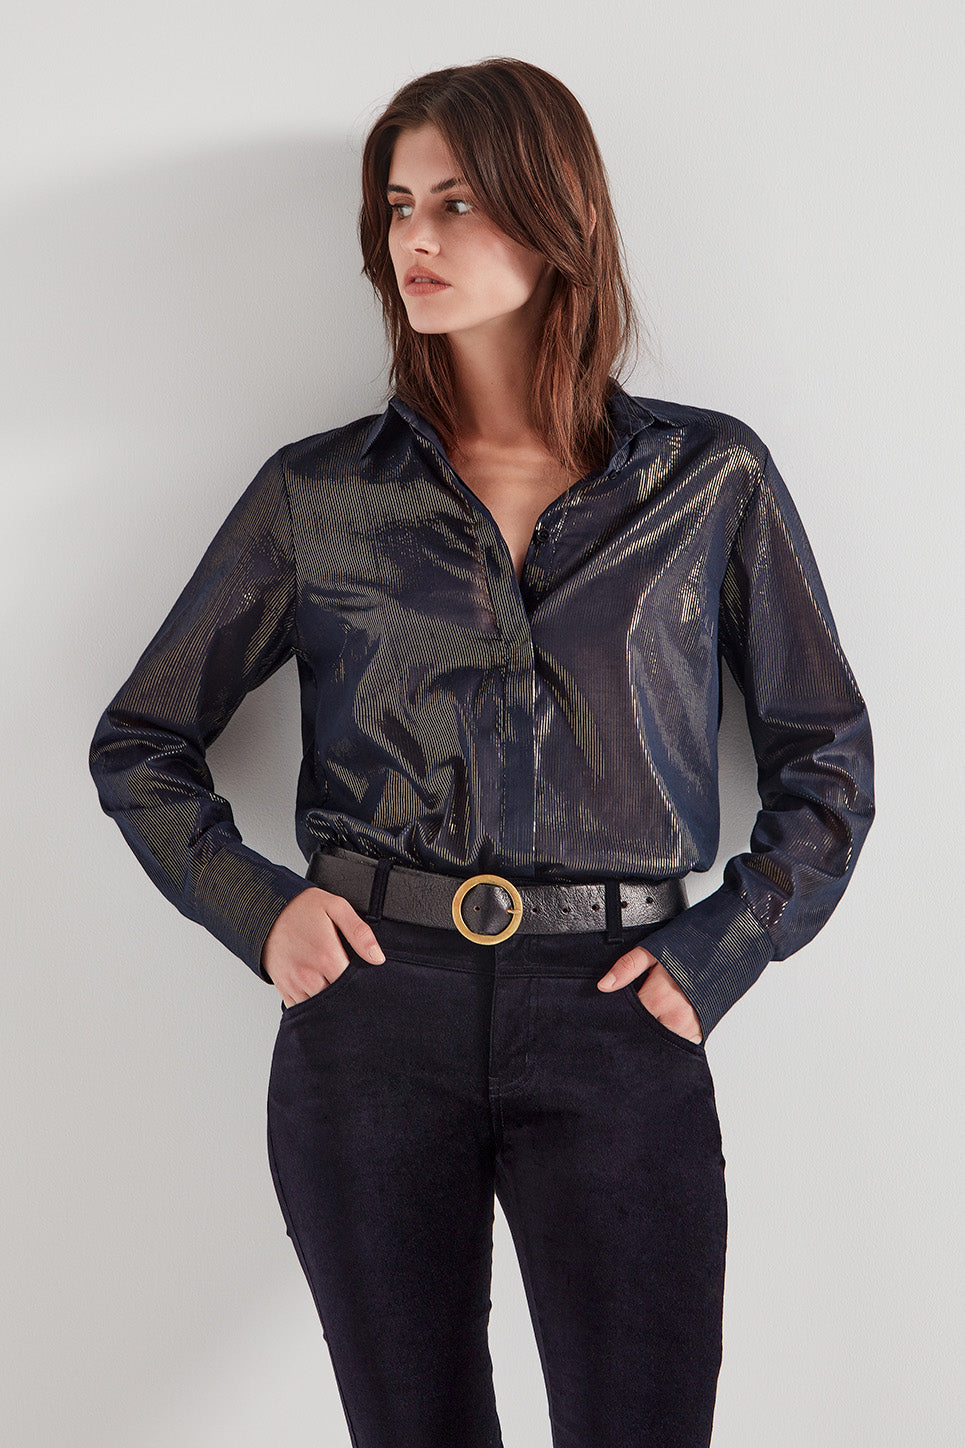 The Sterling Shirt in Navy Gold